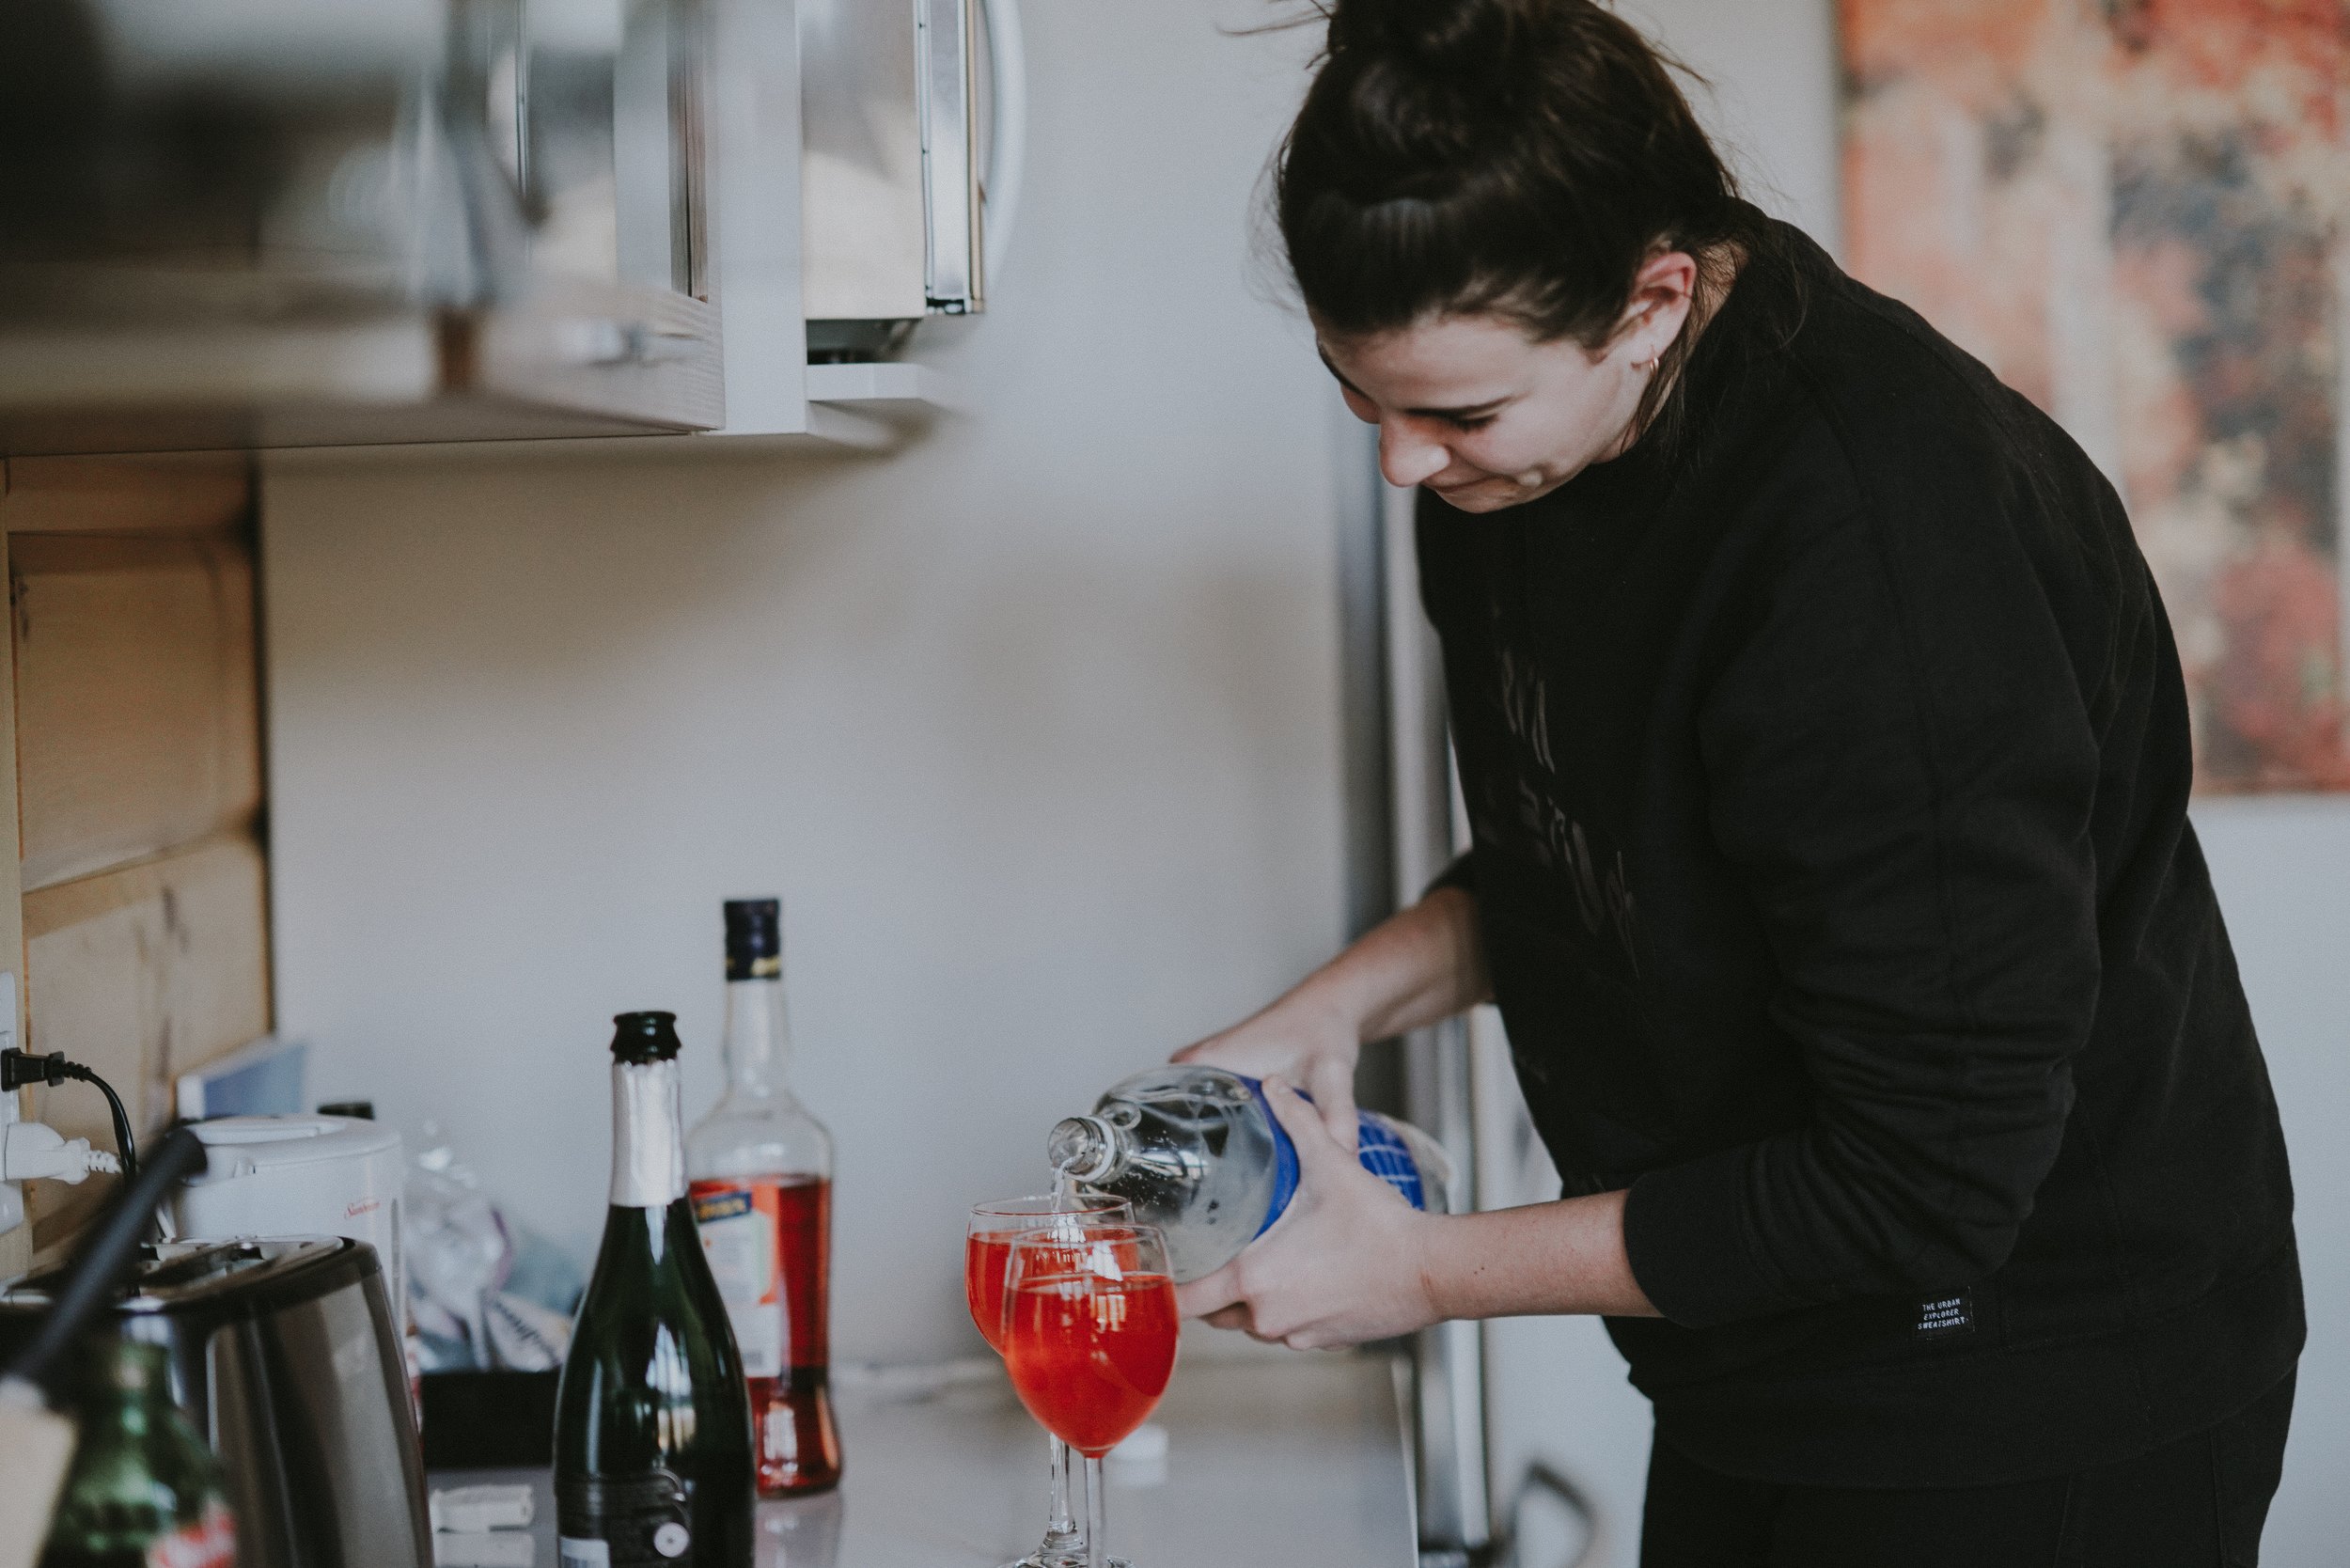 Property Manager Daily Update: 5 Ways to Increase Rental Value and Banning Alcohol